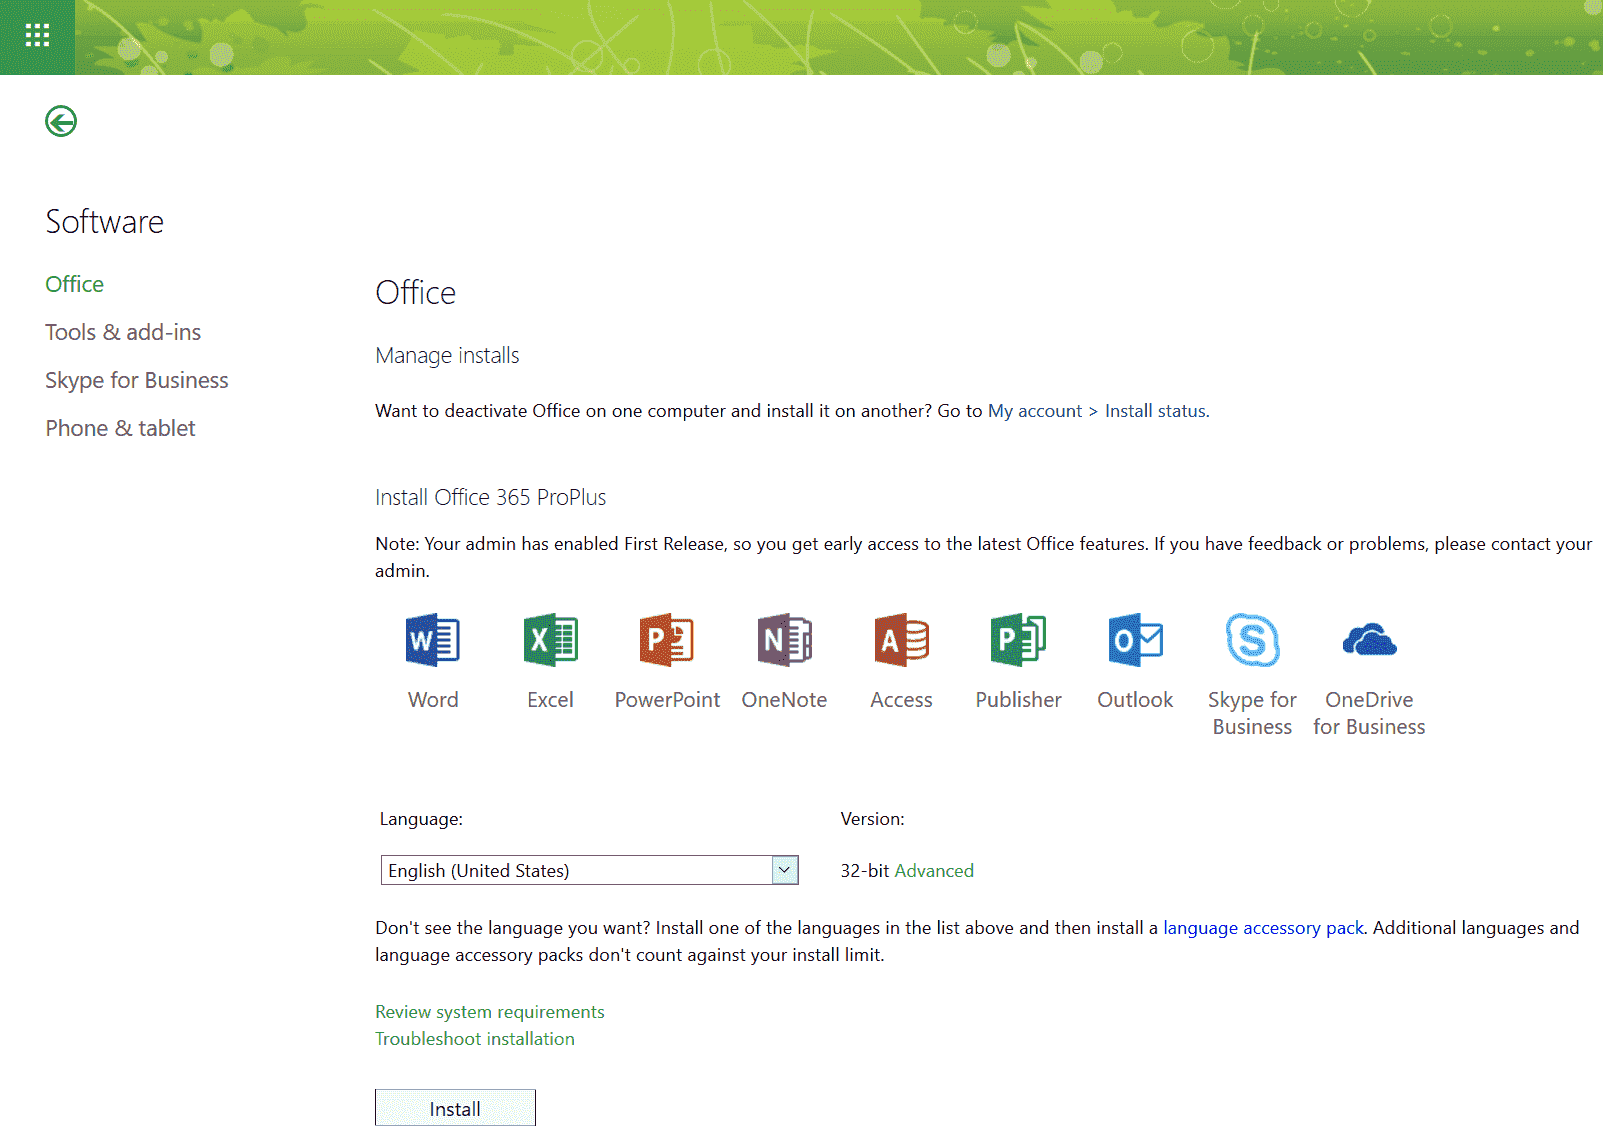 How To Install Office 365 Pro Plus With The New Ribbon Interface On Windows 10